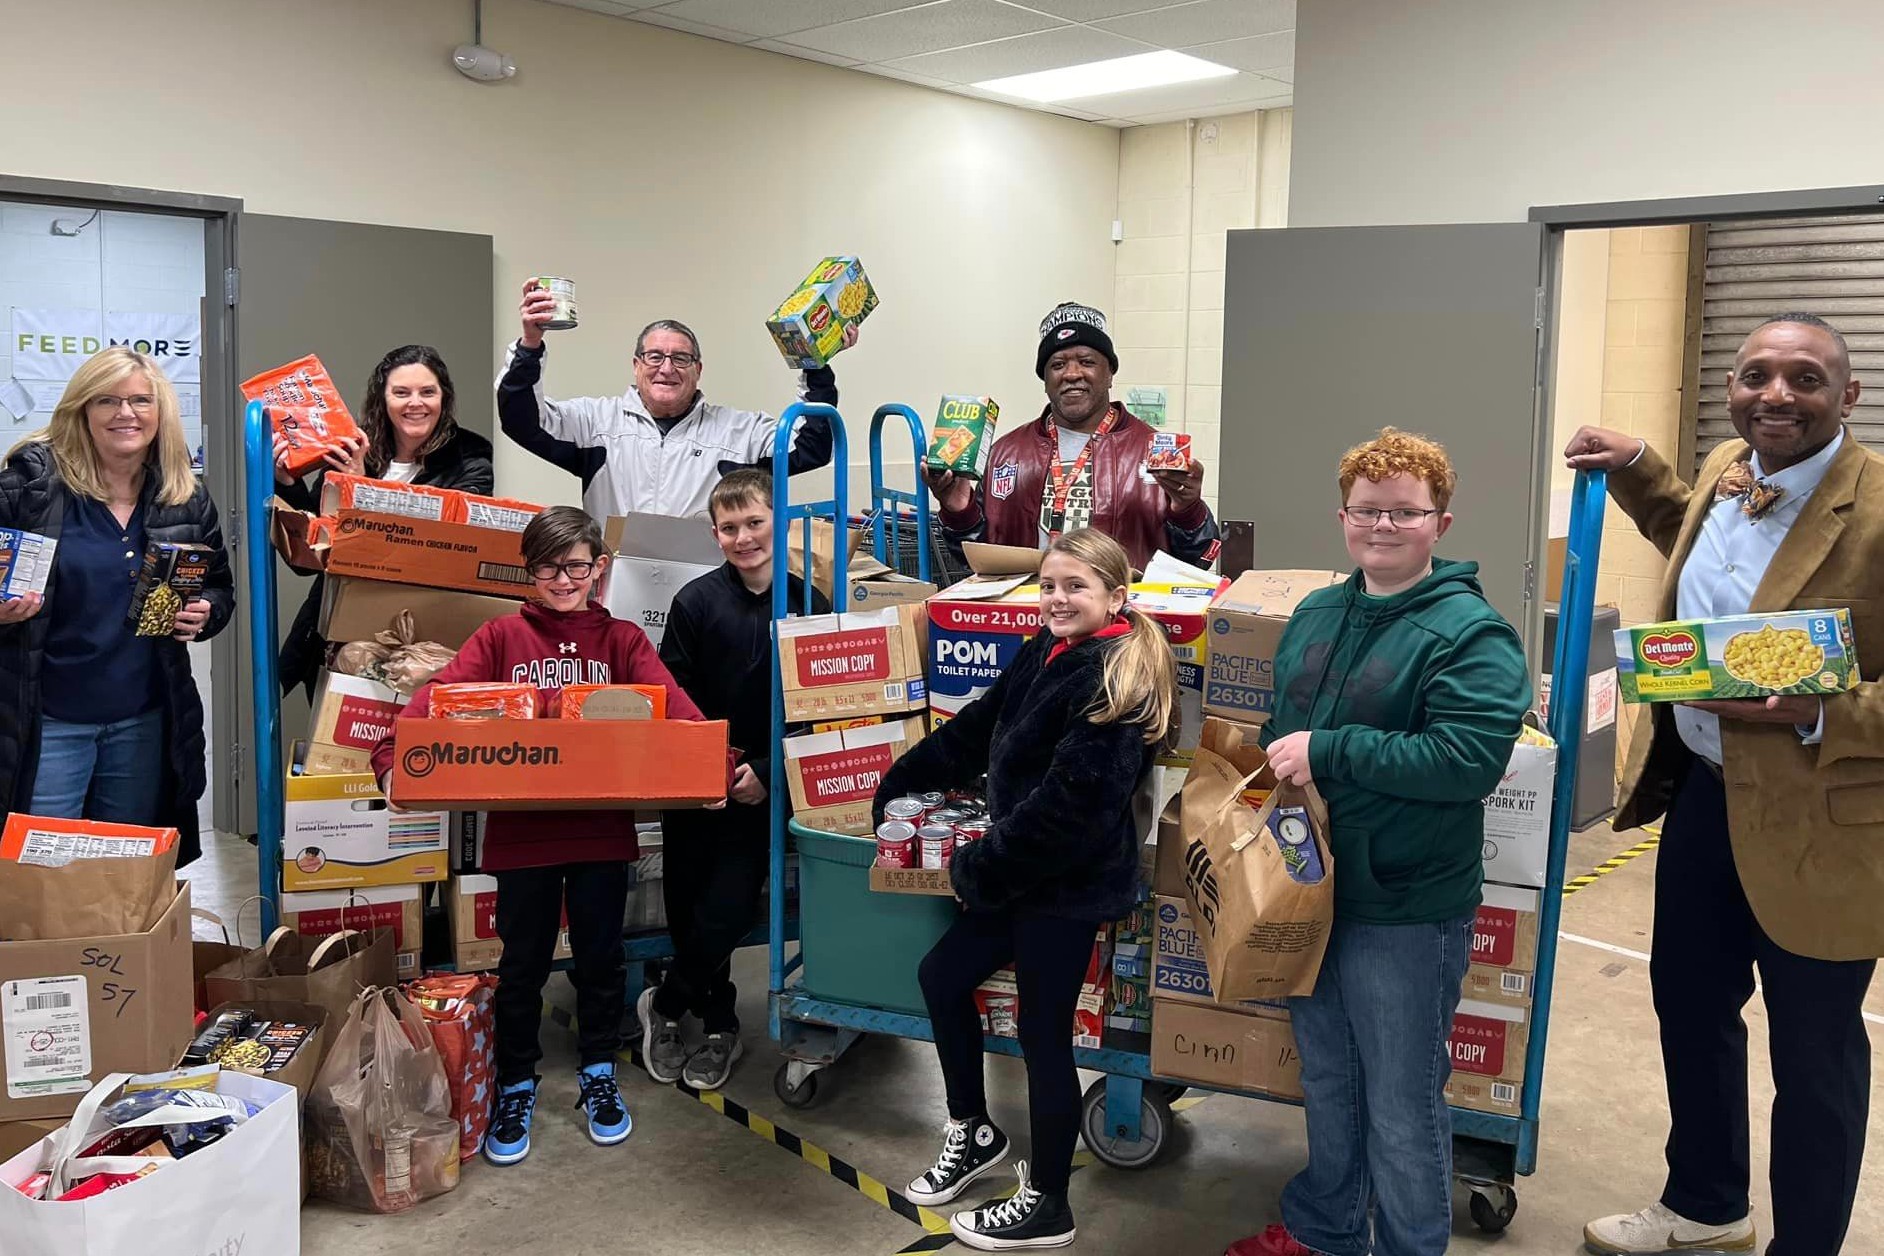 A group of 4 elementary students stand with various adults from the food bank and Tussing Elementary. Around them are numerous bags of nonperishable food they collected as a school to donate.